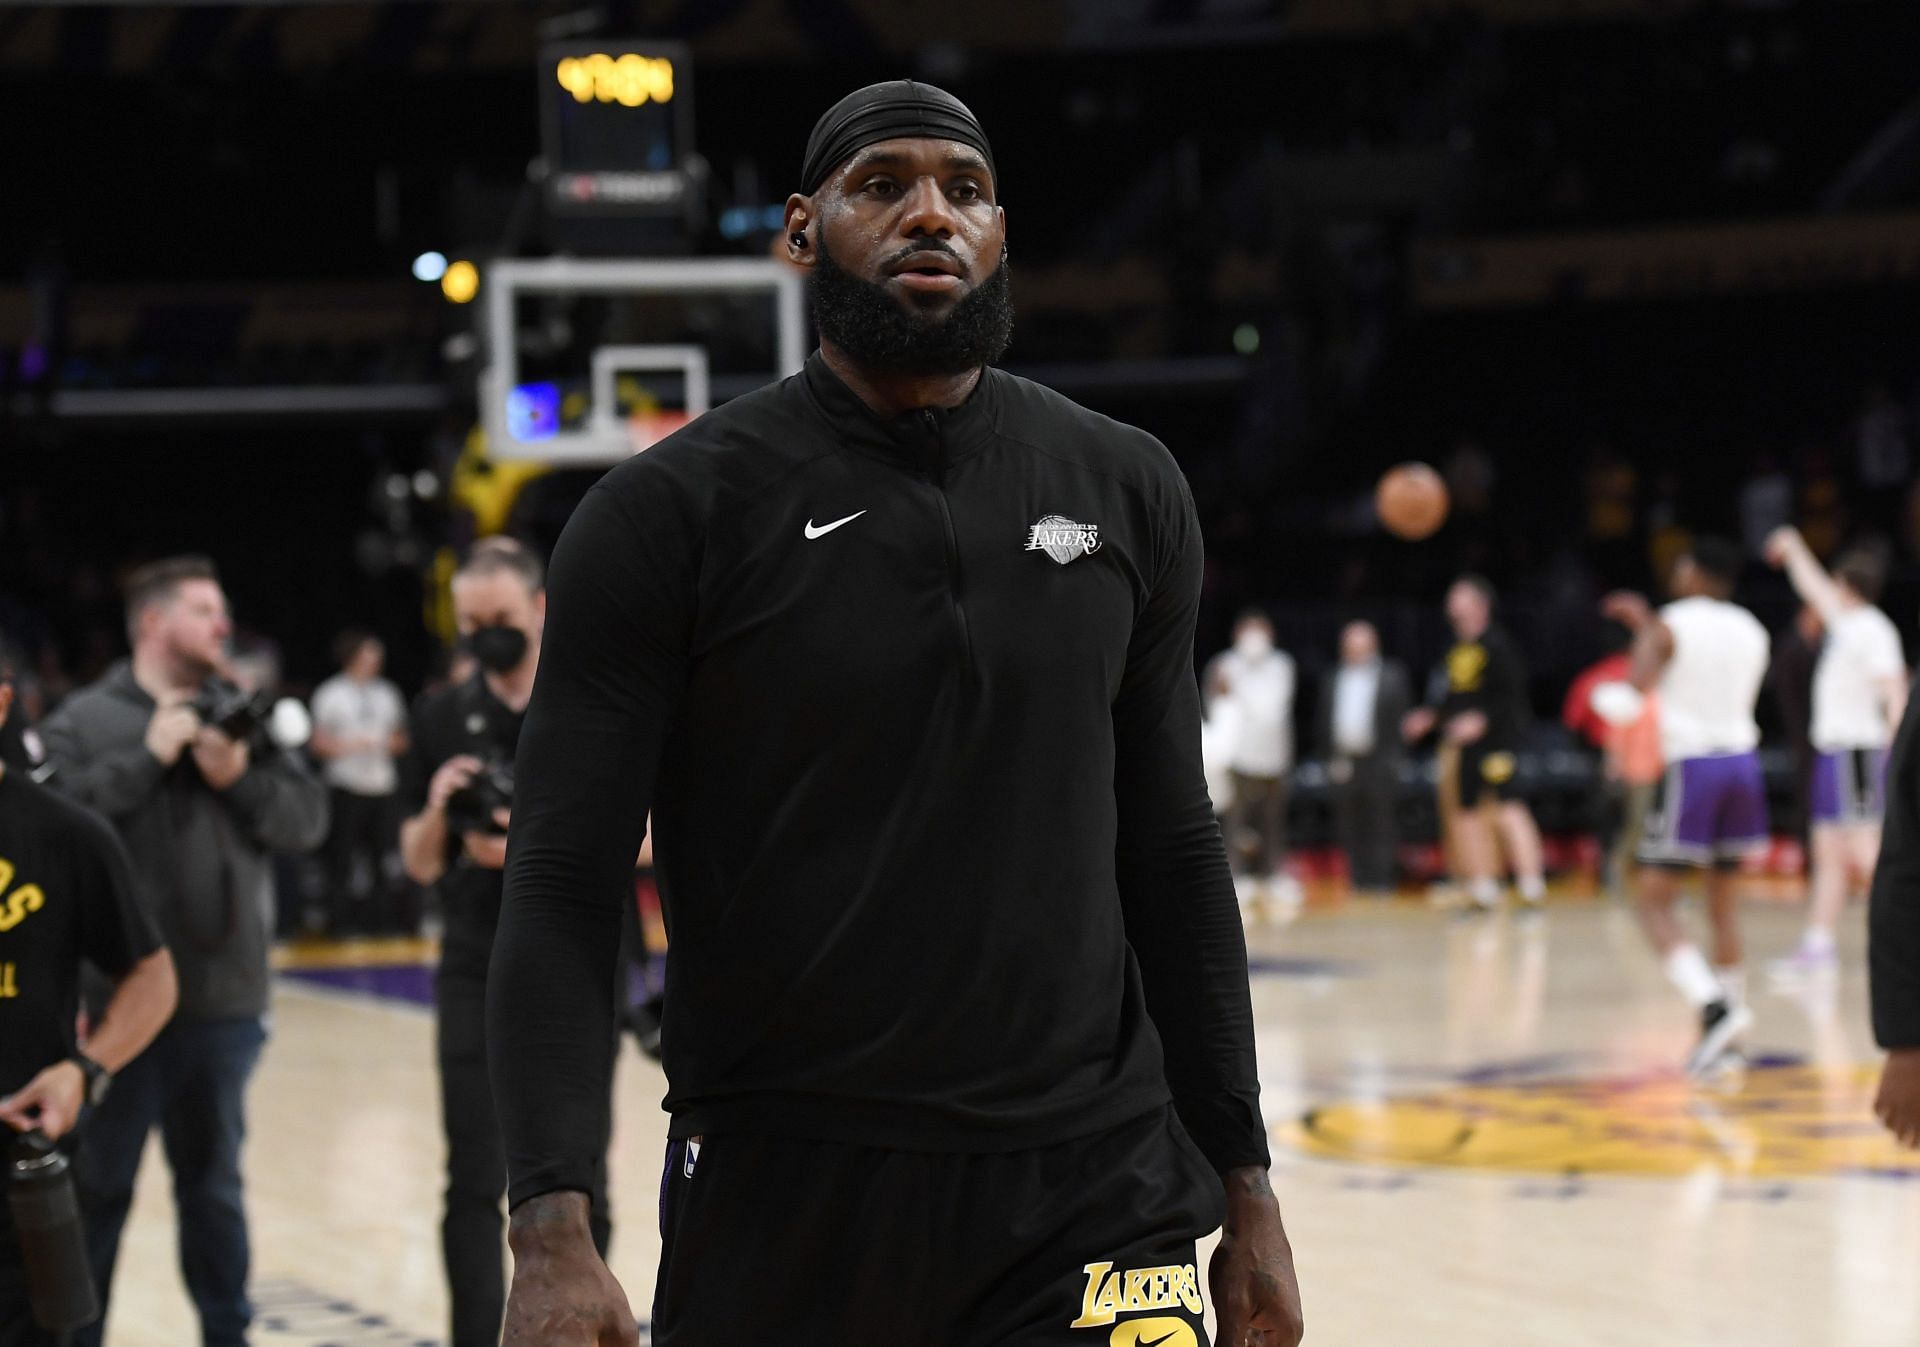 LeBron James of the LA Lakers walks off the court after warming up